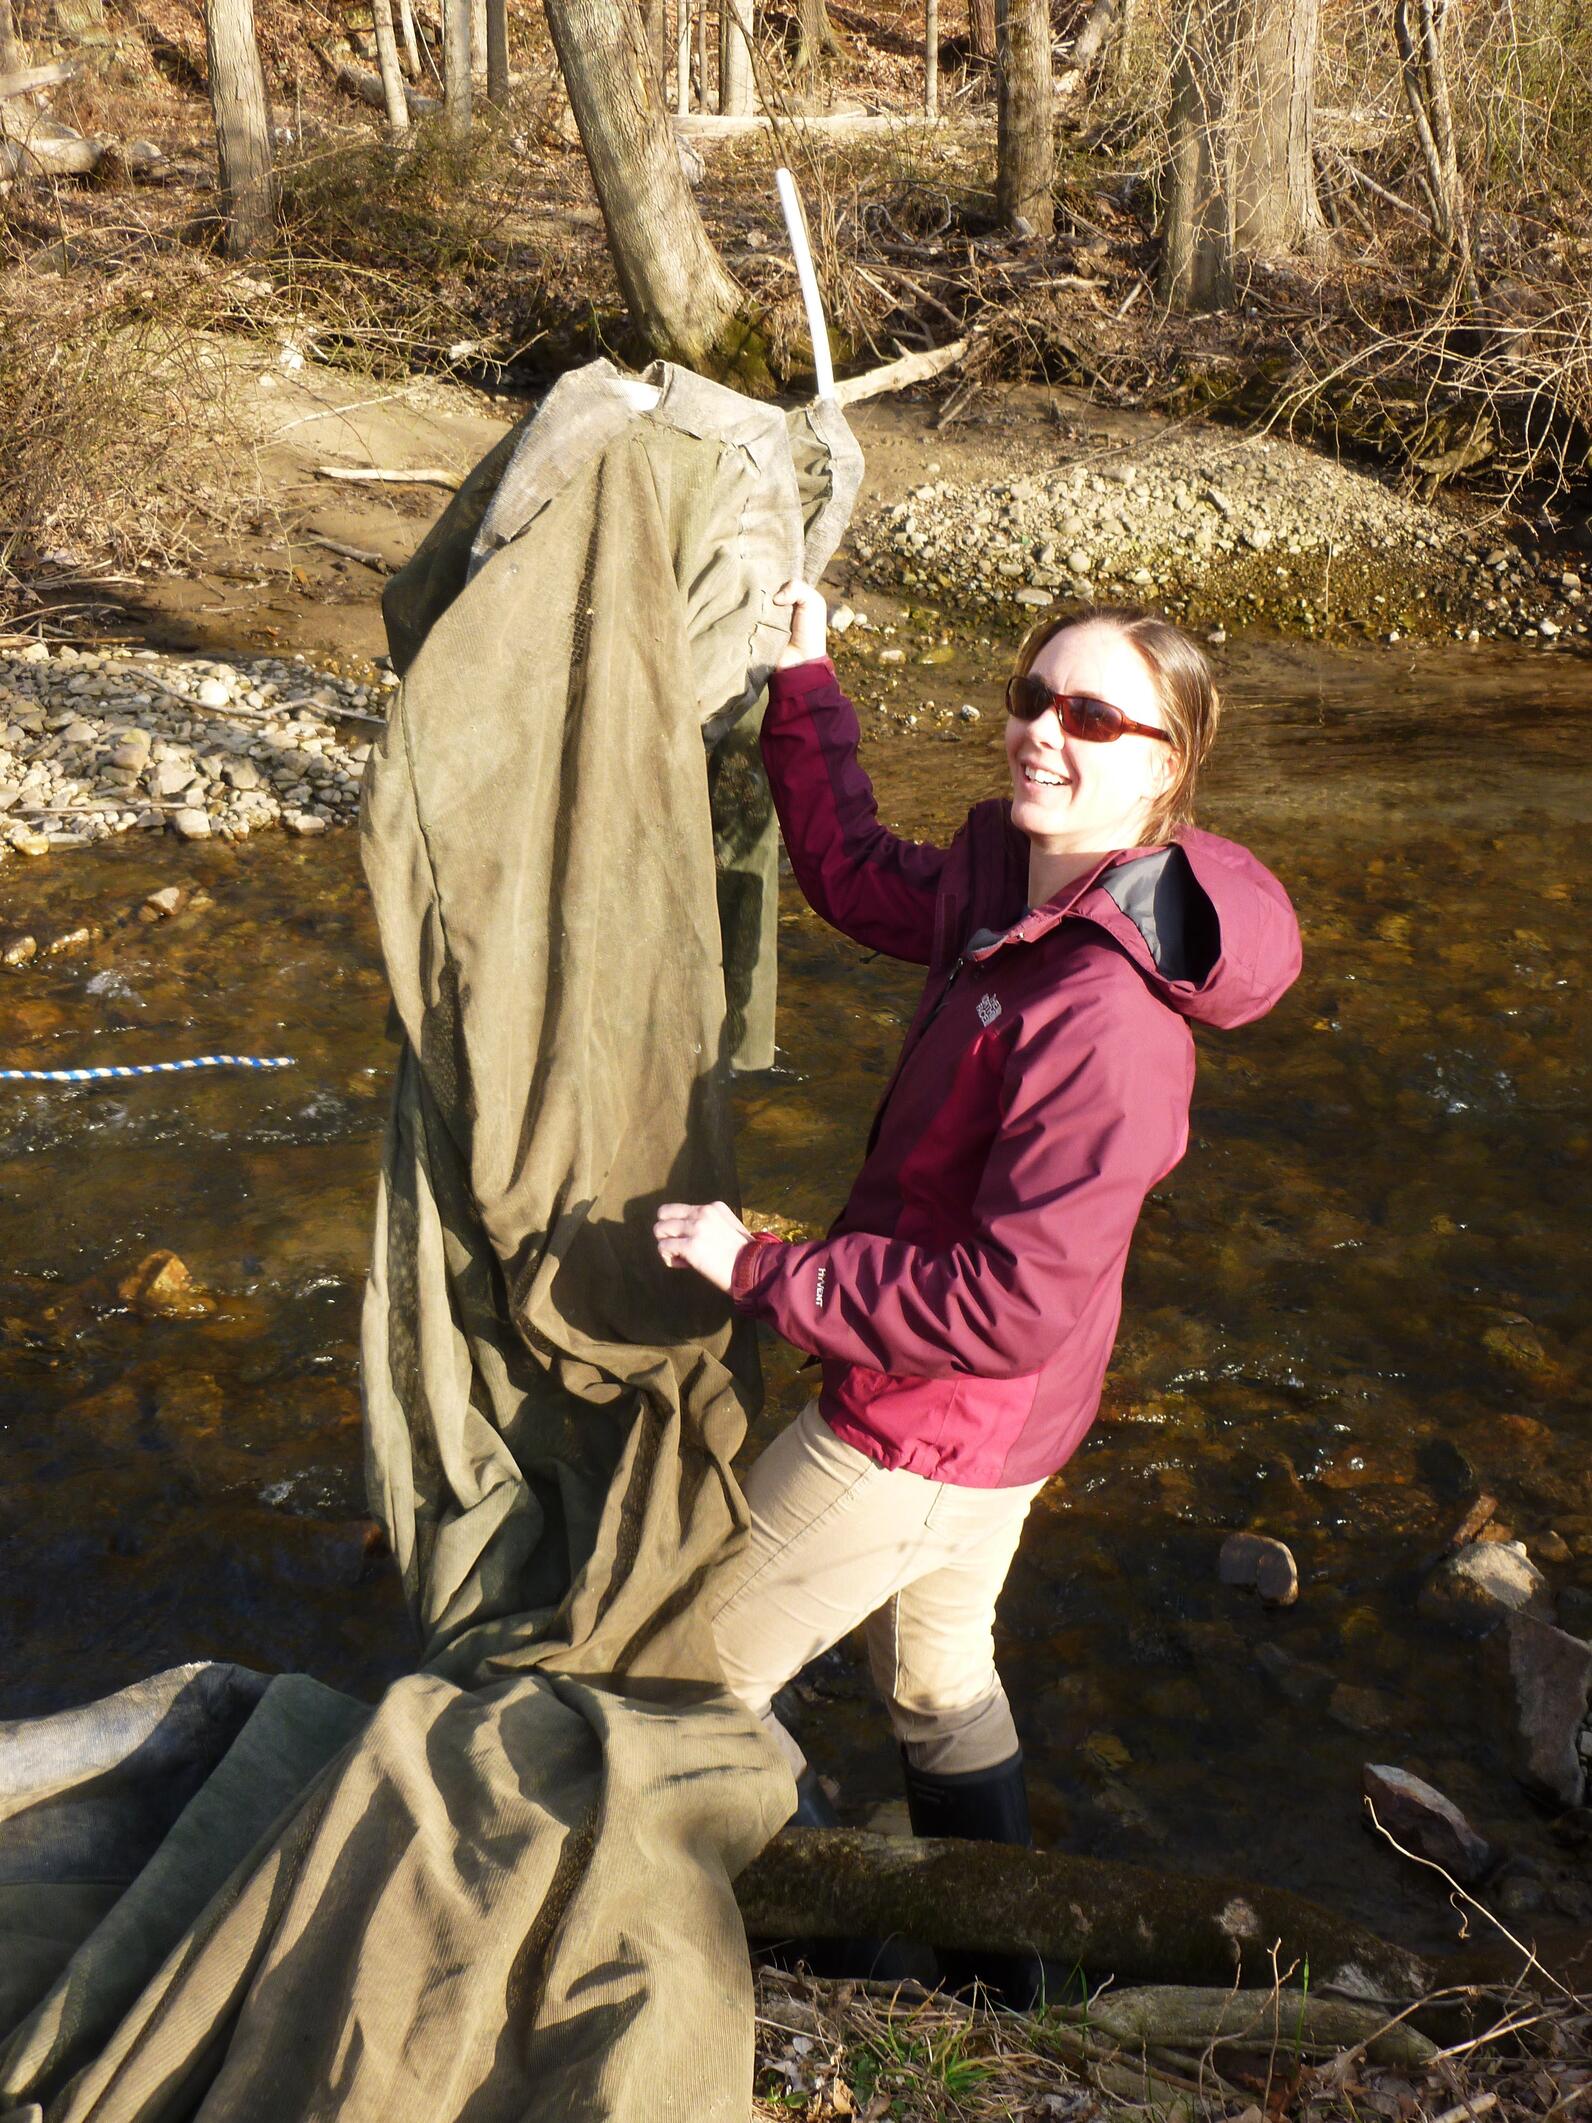 Rebecca Schultz standing in water outside while holding a large net and smiling.